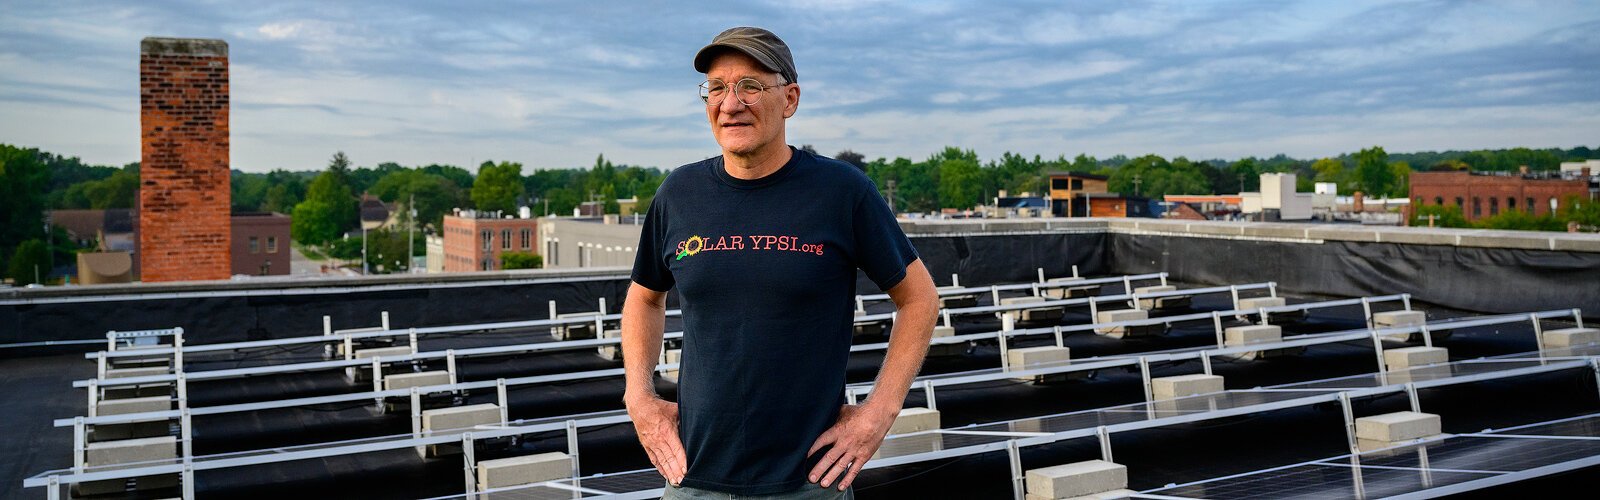 Solar Ypsi founder Dave Strenski stands among the solar panels on the roof of Riverside Arts Center in Ypsilanti.